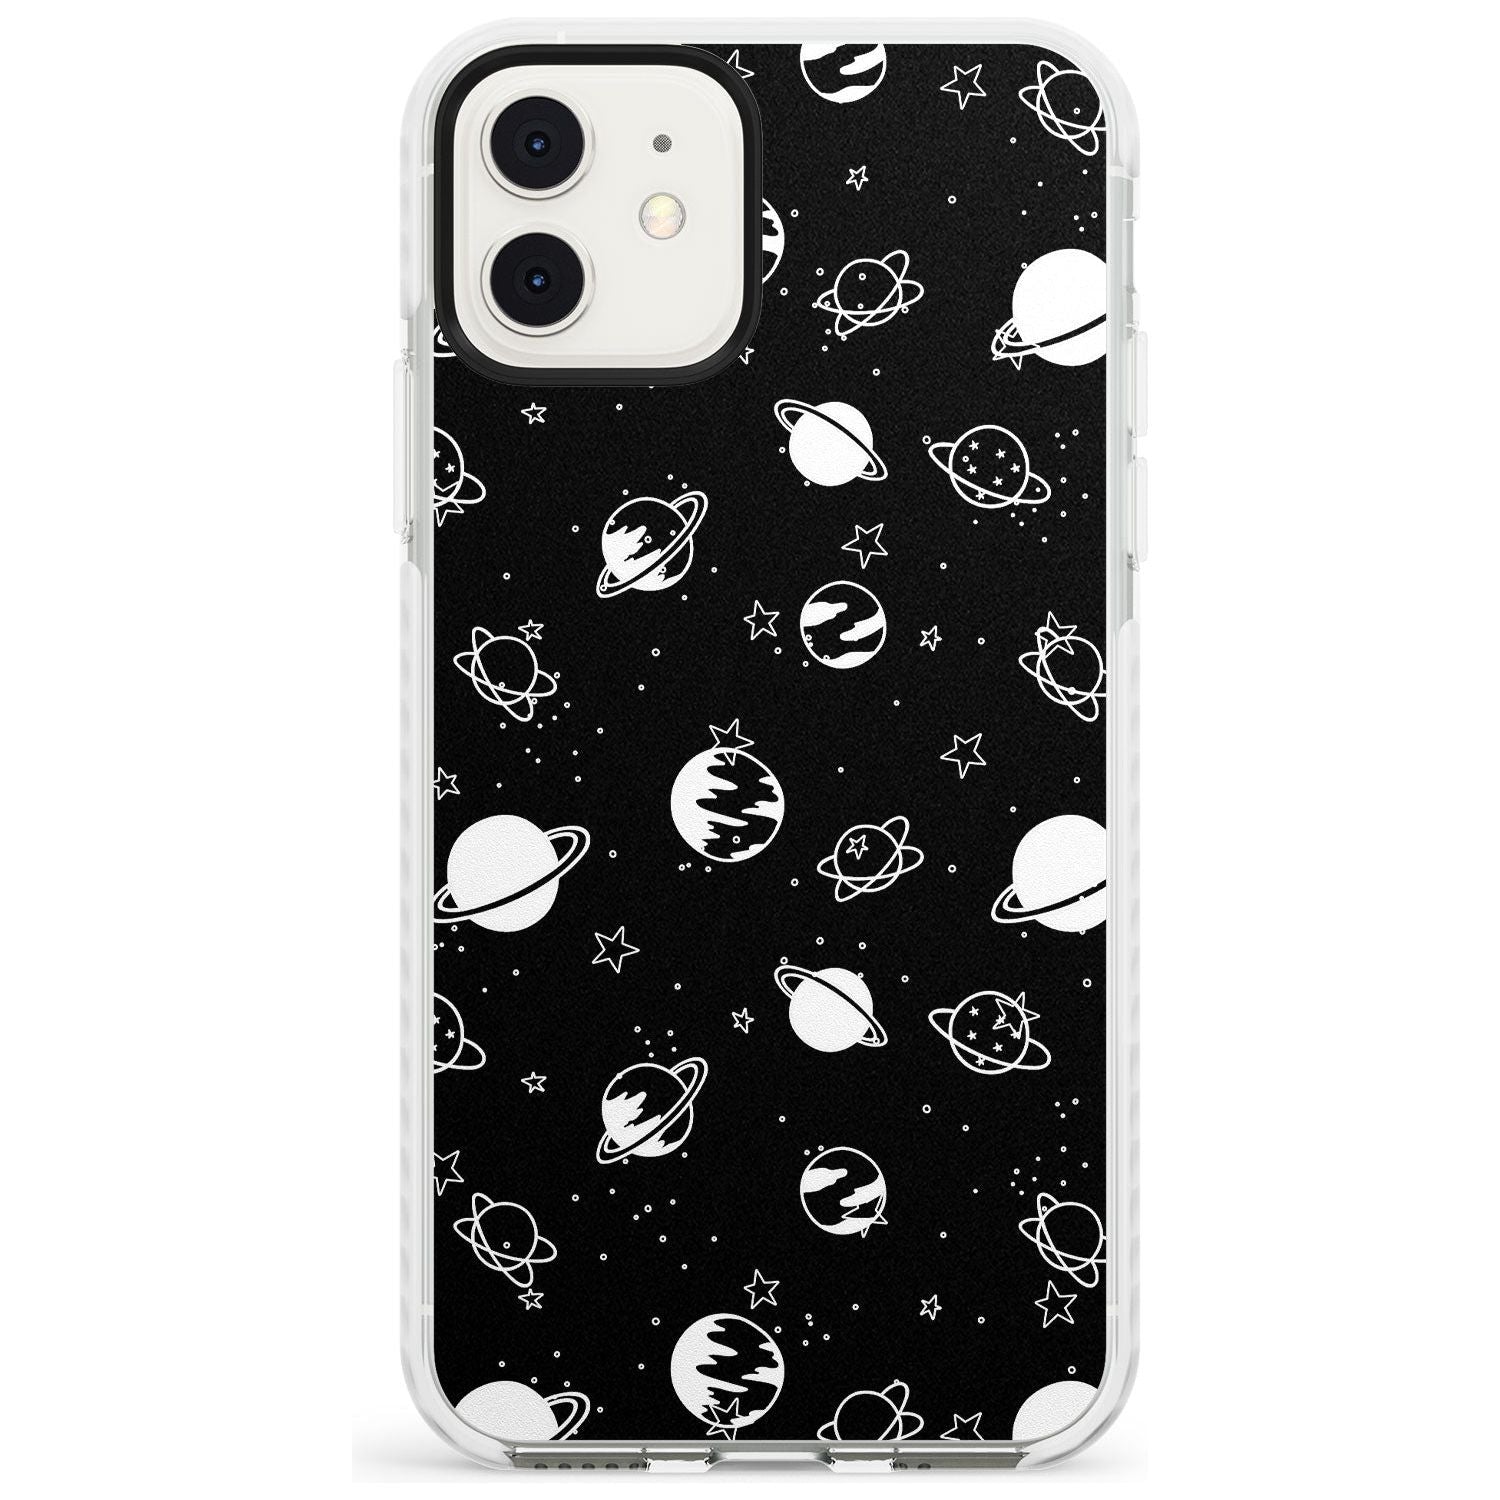 White Planets on Black Slim TPU Phone Case for iPhone 11